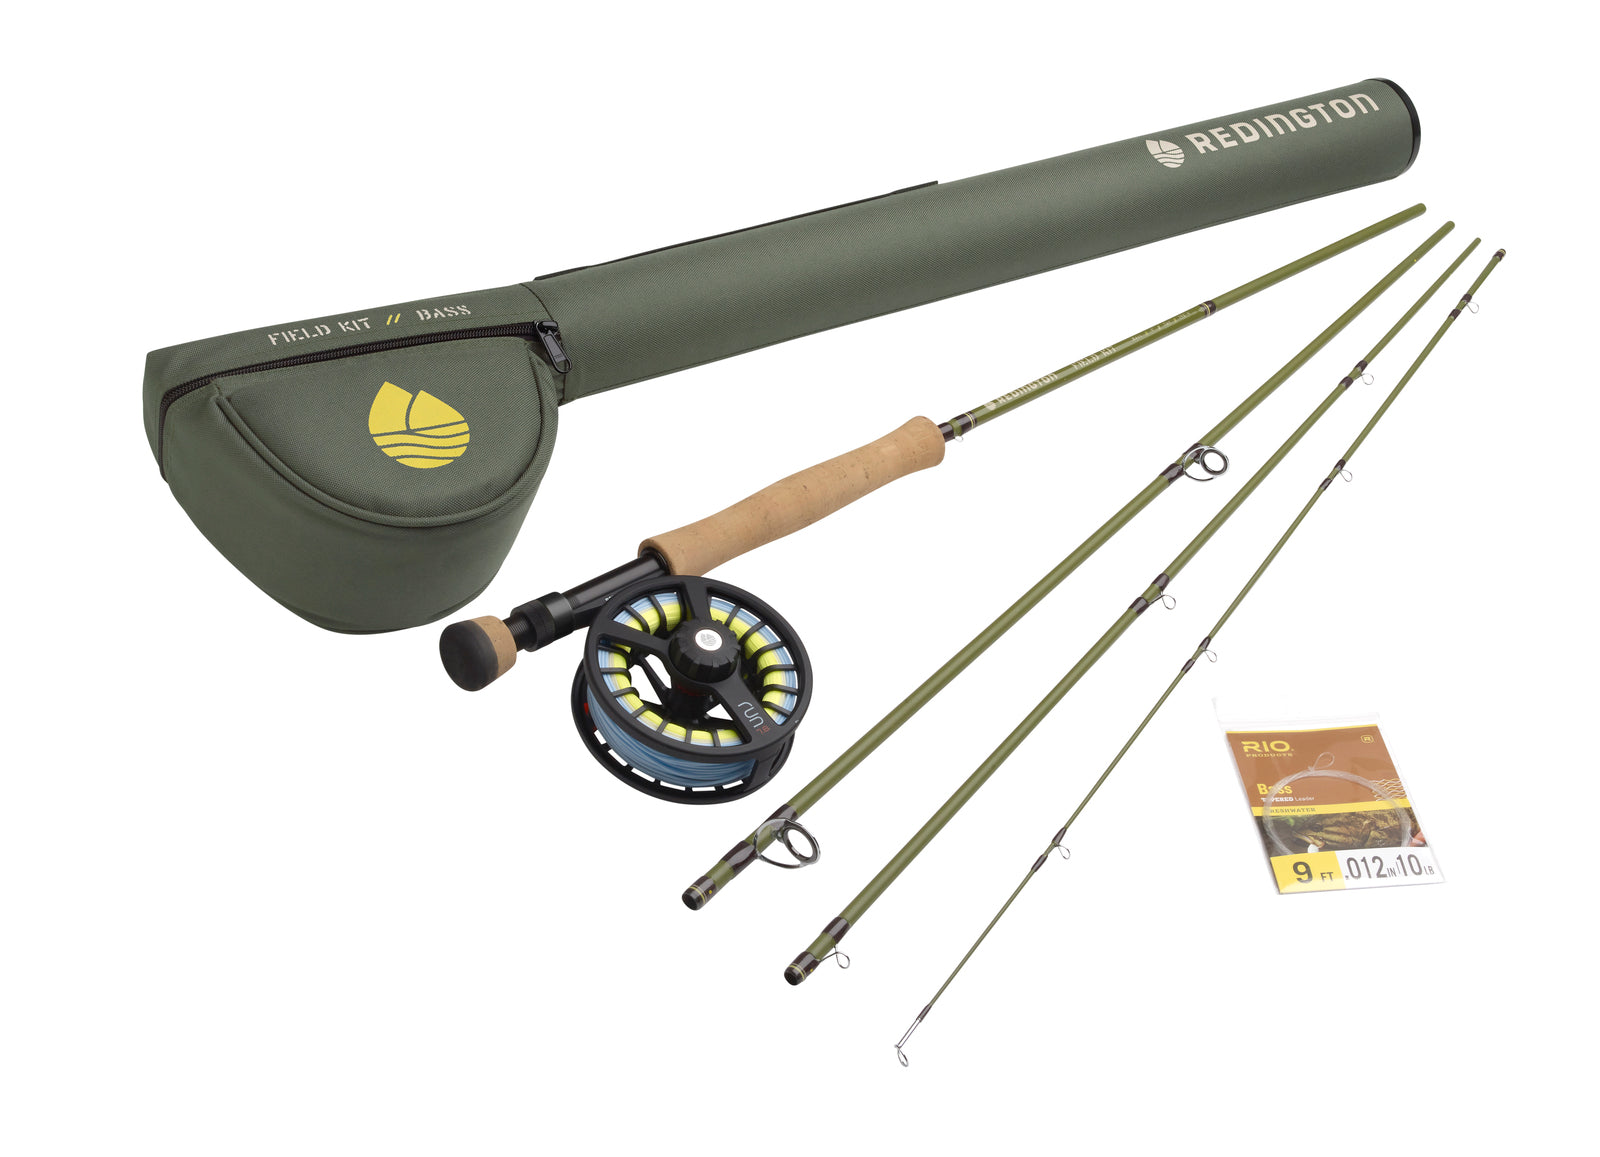 Redington Path Fly Rod Combo Kit with Pre-Spooled Crosswater Reel,  Medium-Fast A